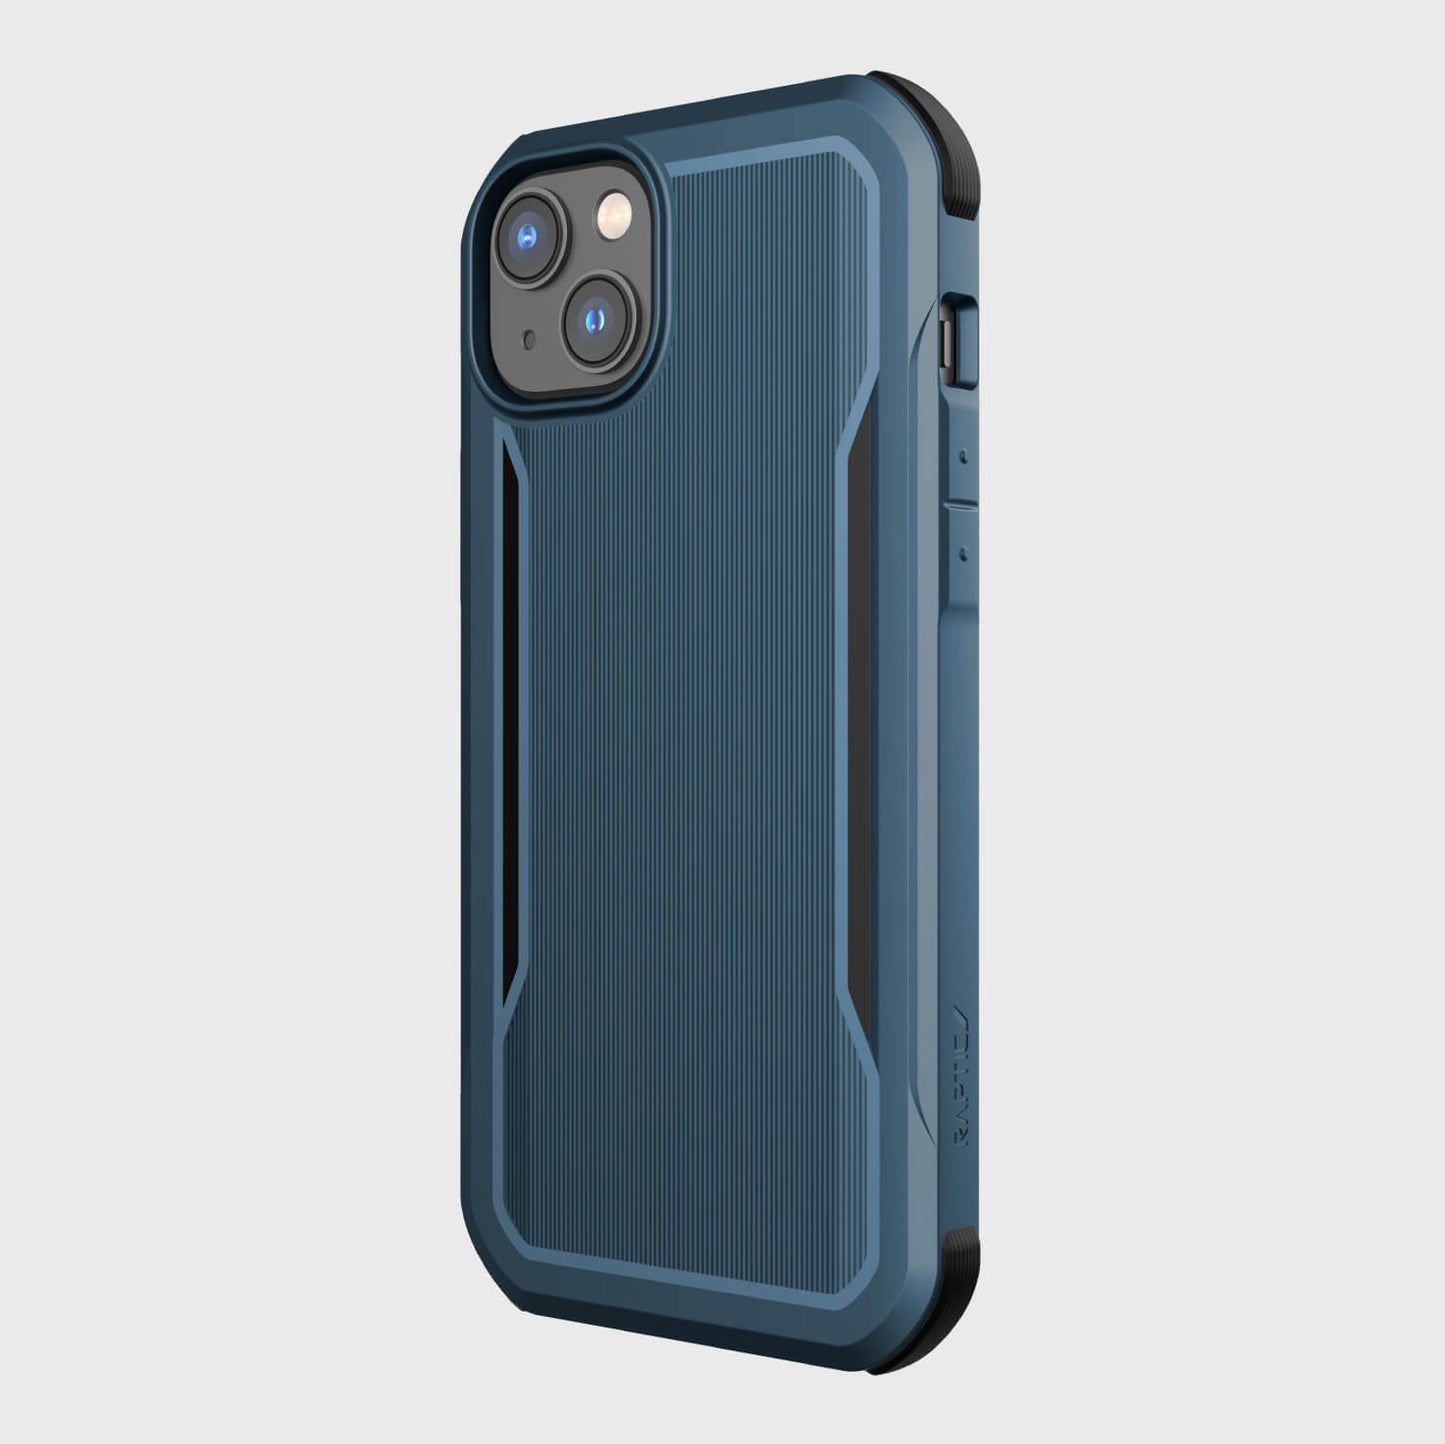 The iPhone 14 Plus Case - Fort Built for MagSafe in blue offers military-grade drop protection offered by Raptic.